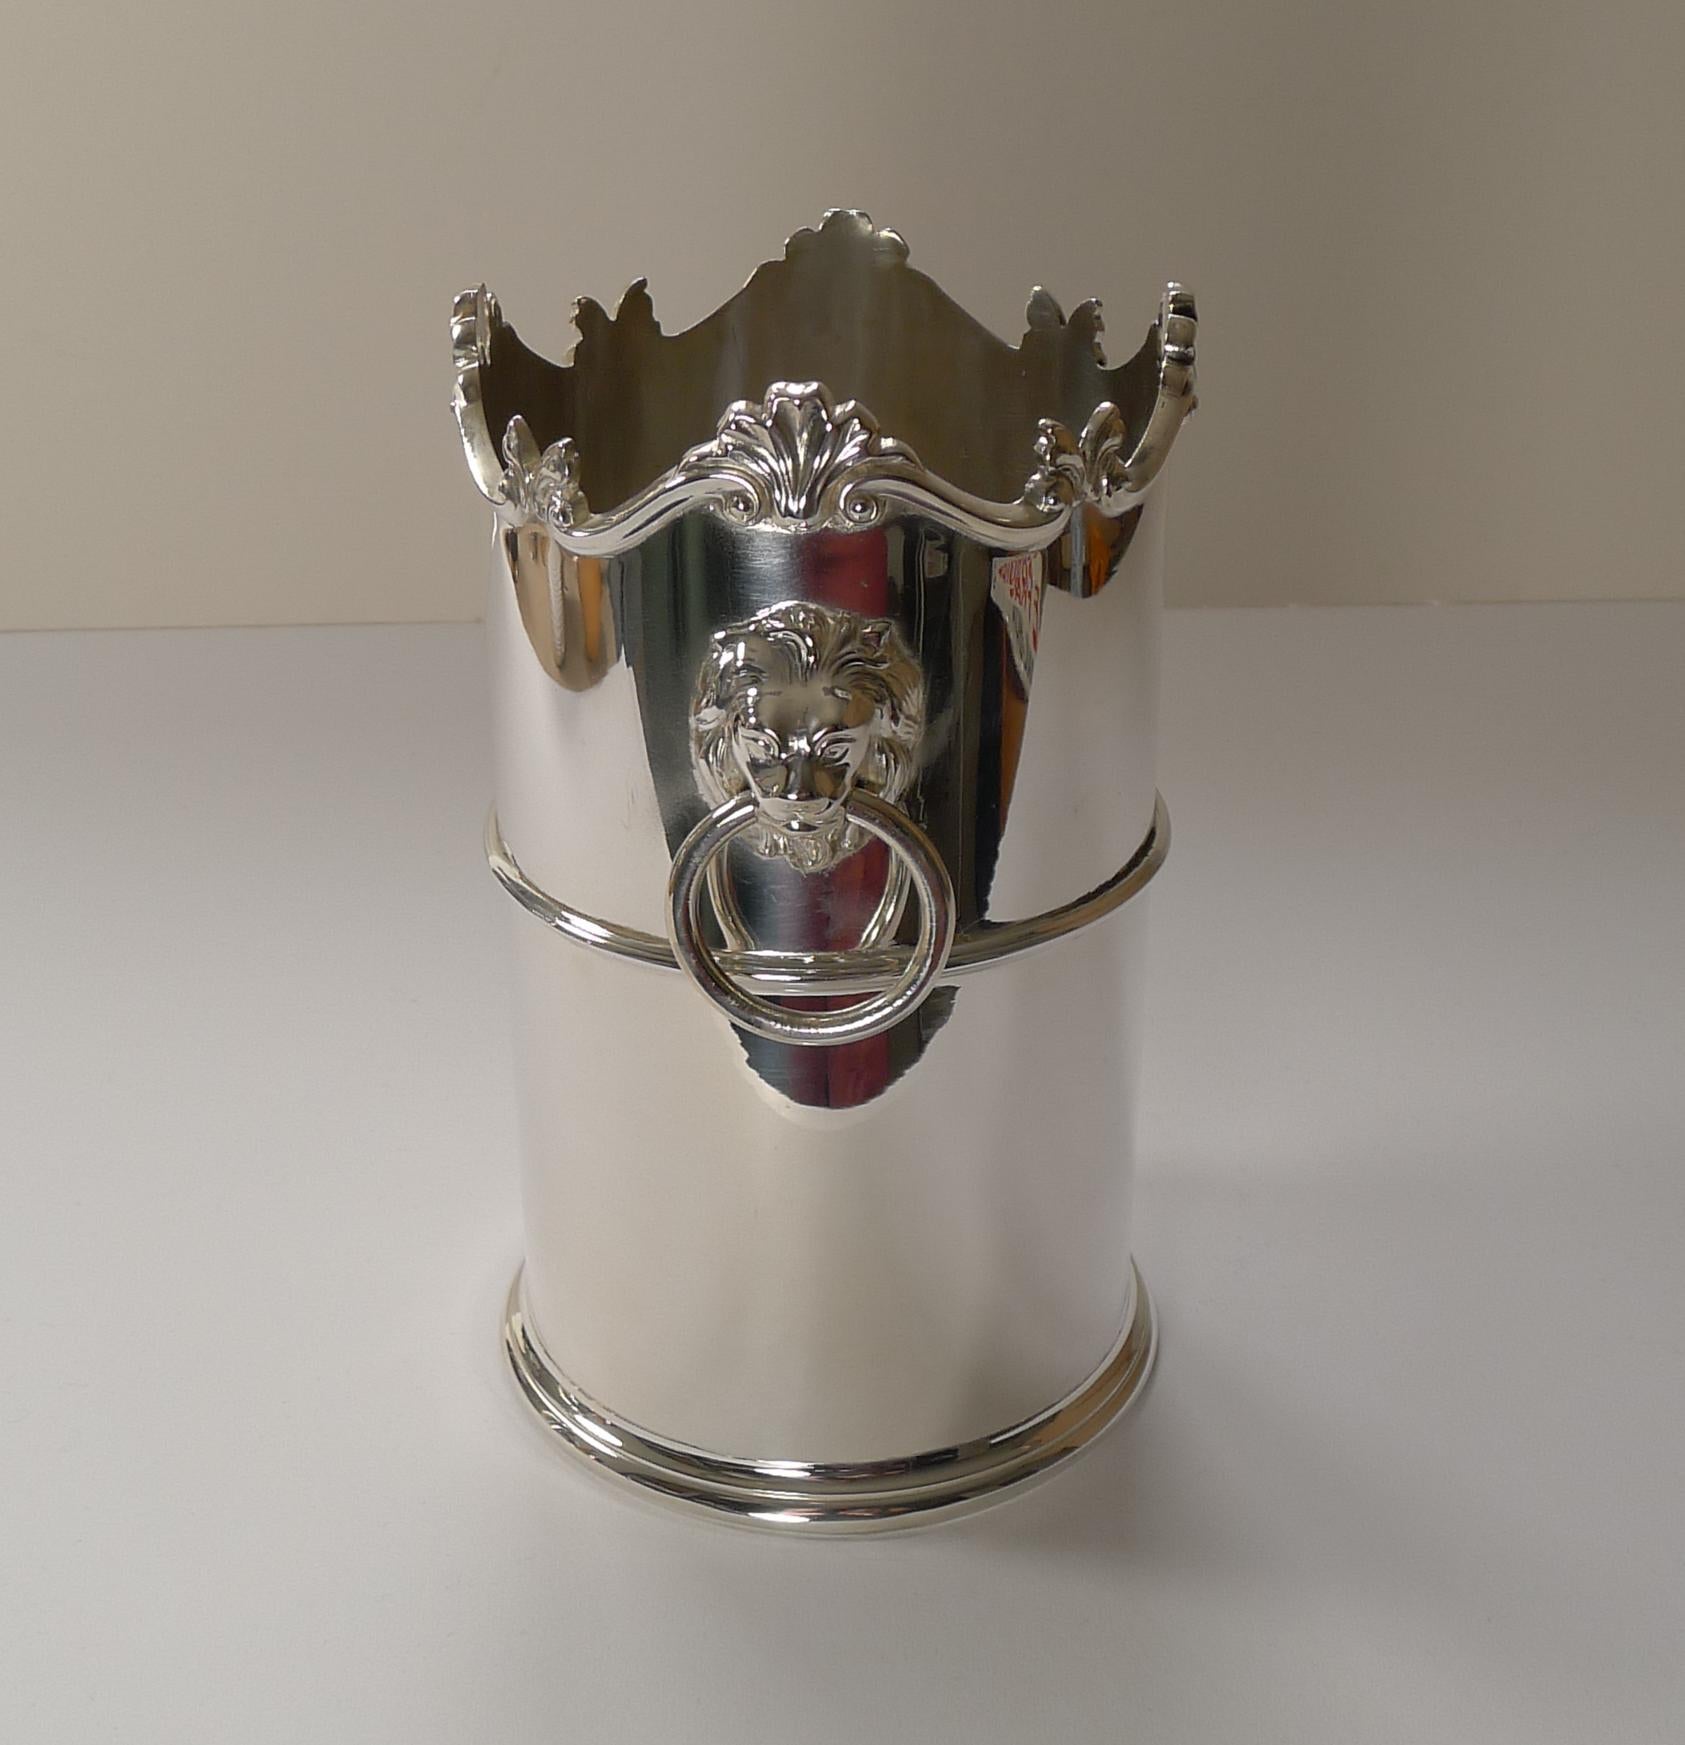 A wonderful late Victorian or Edwardian bottle holder / Coaster in silver plate just back from our silversmith's workshop having been professionally cleaned and polished, restoring it to it's former glory.

Each side of the holder are two large